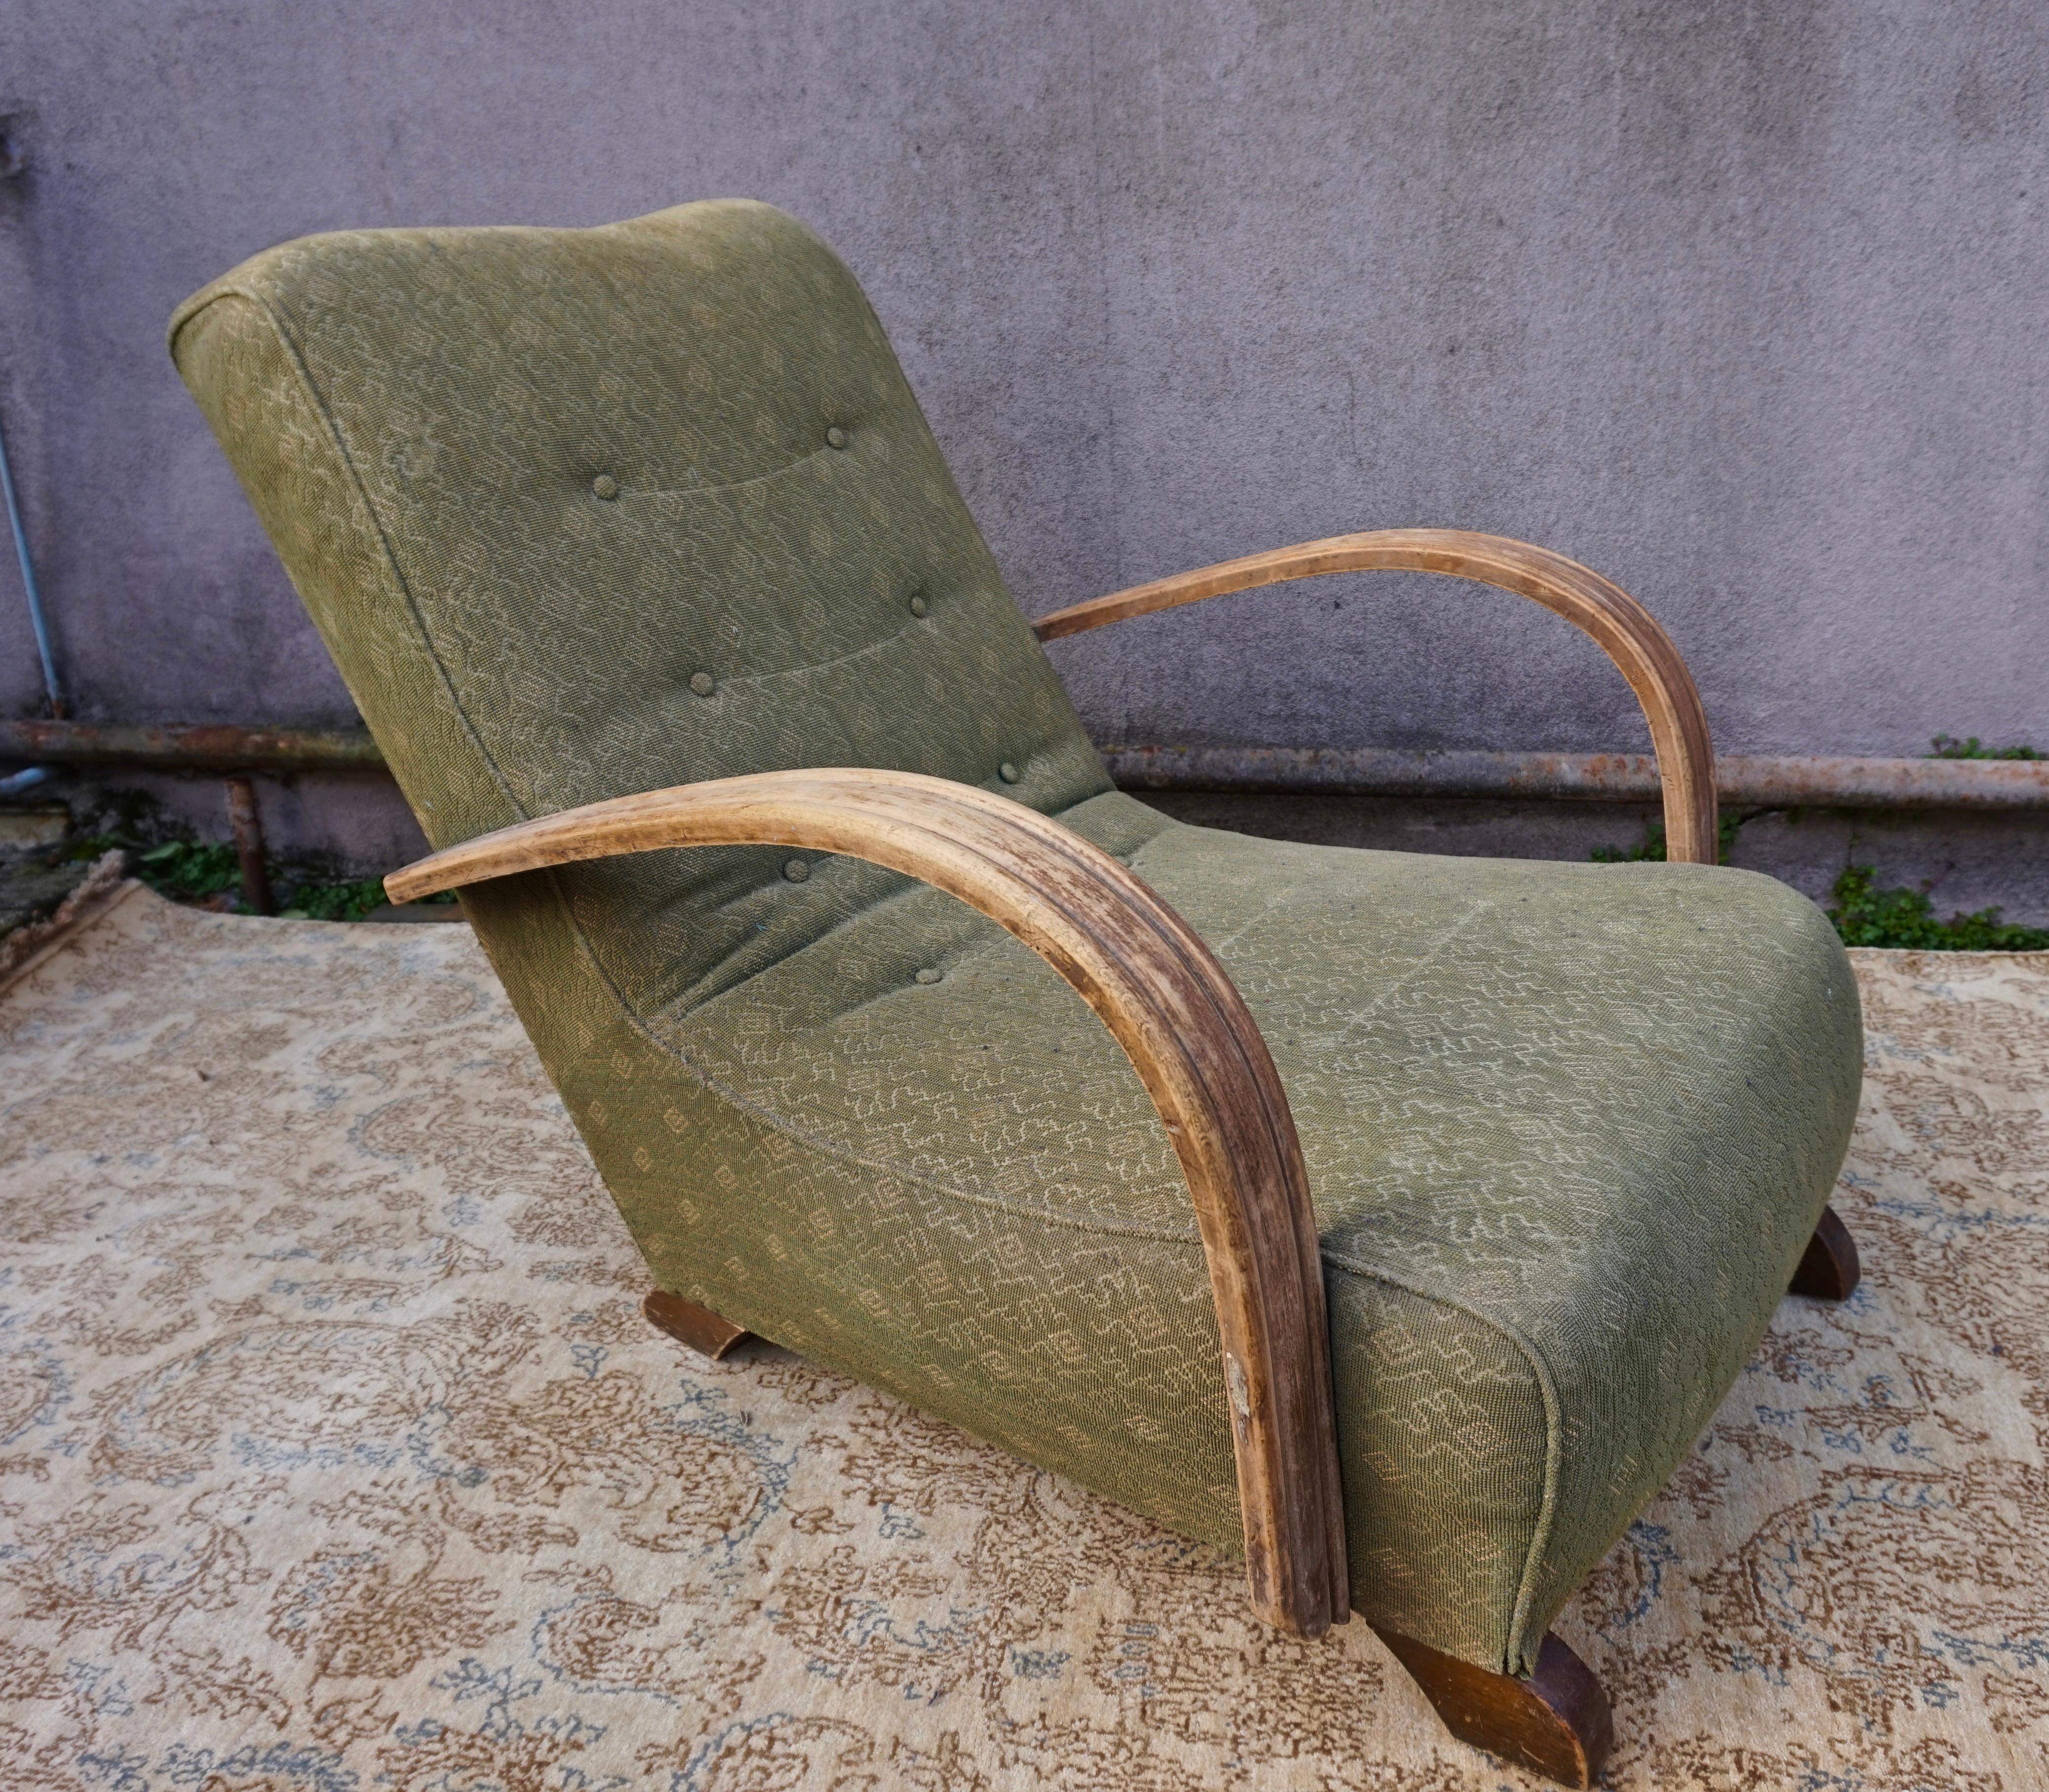 Well proportioned Art Deco lounge chair in all original condition including upholstery oozing character and bygone authenticity.